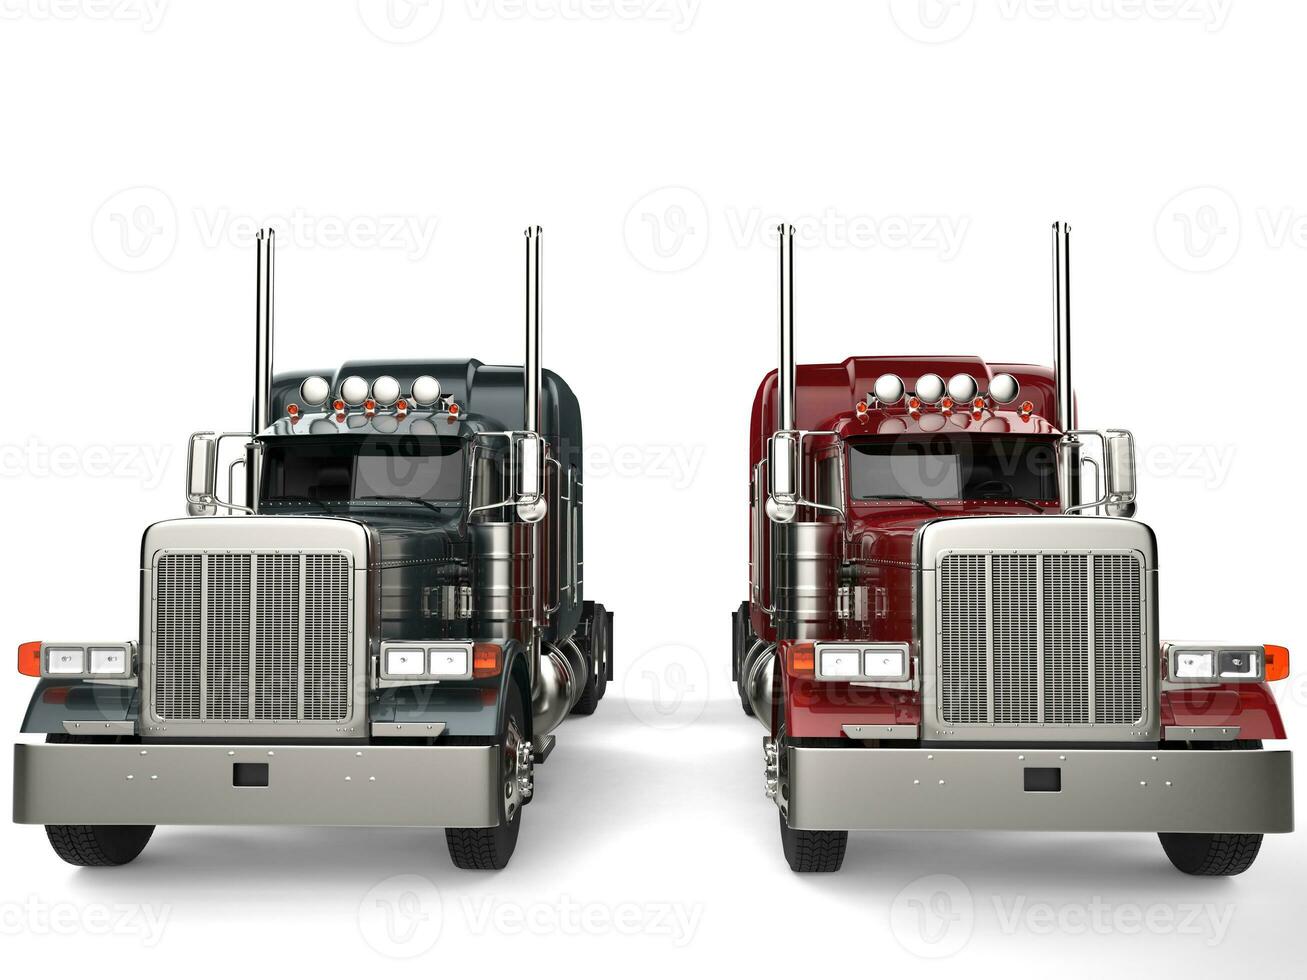 Classic eighteen wheeler trucks in metallic gray and red colors - front view photo